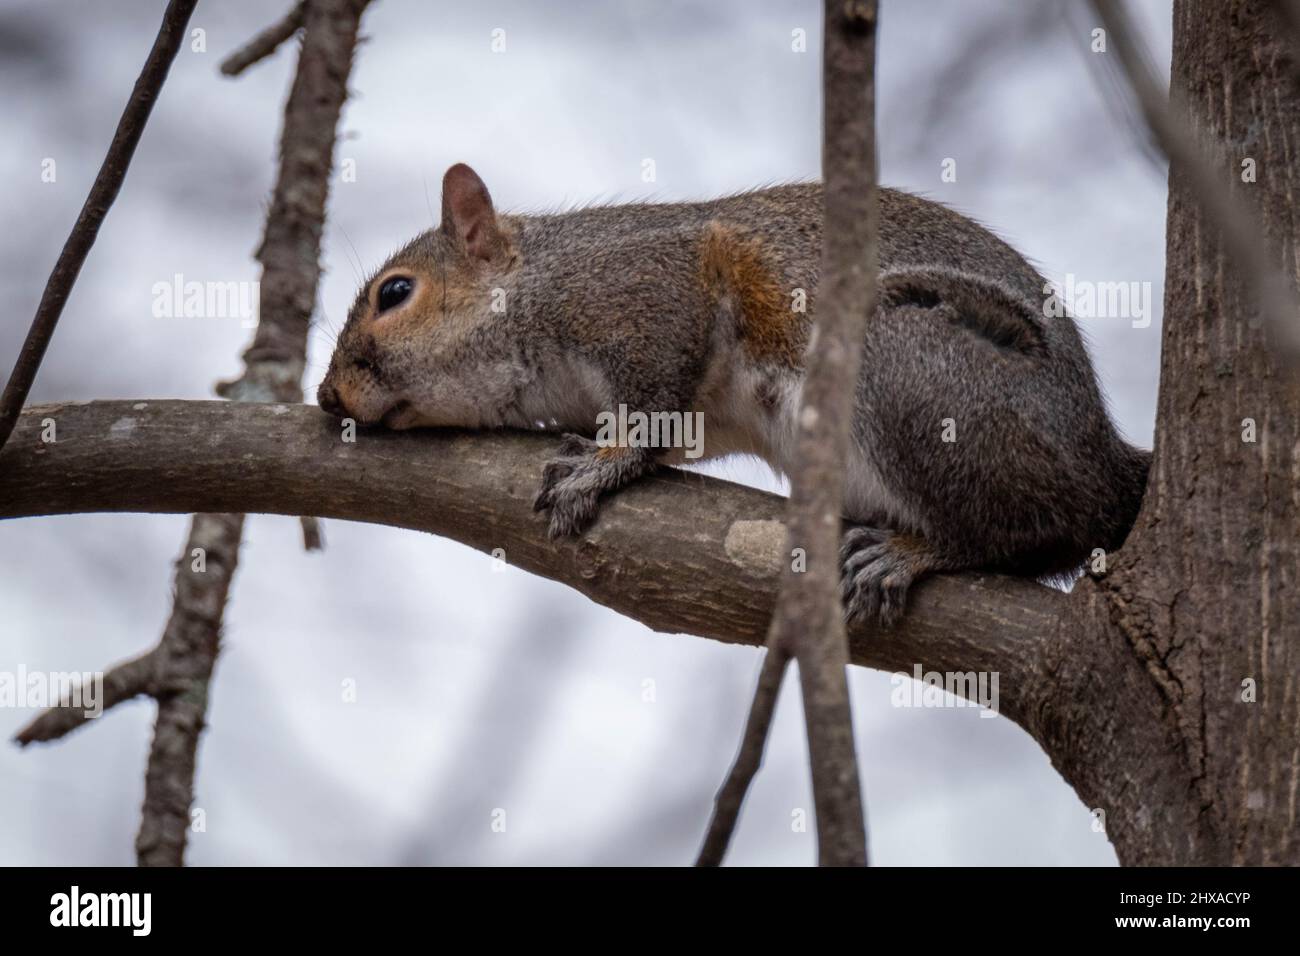 An Eestern Gray Squirrel seems to be hugging the tree limb. Good for a meme. Raleigh, North Carolina. Stock Photo